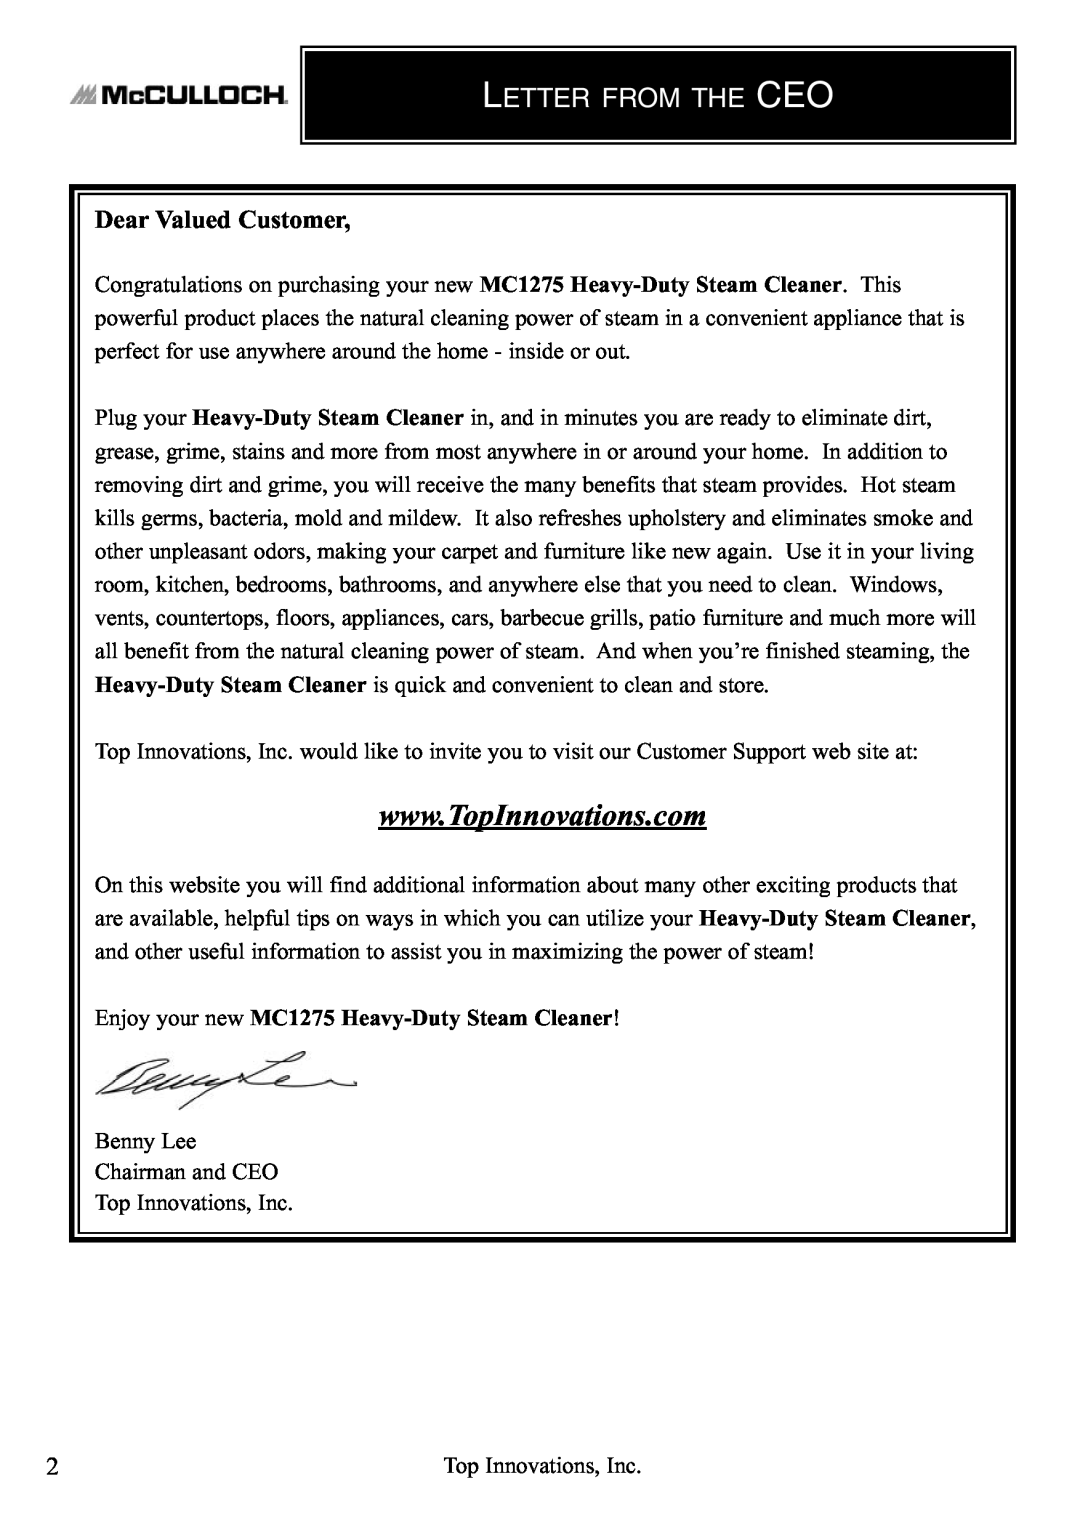 McCulloch warranty Letter From The Ceo, Enjoy your new MC1275 Heavy-DutySteam Cleaner 